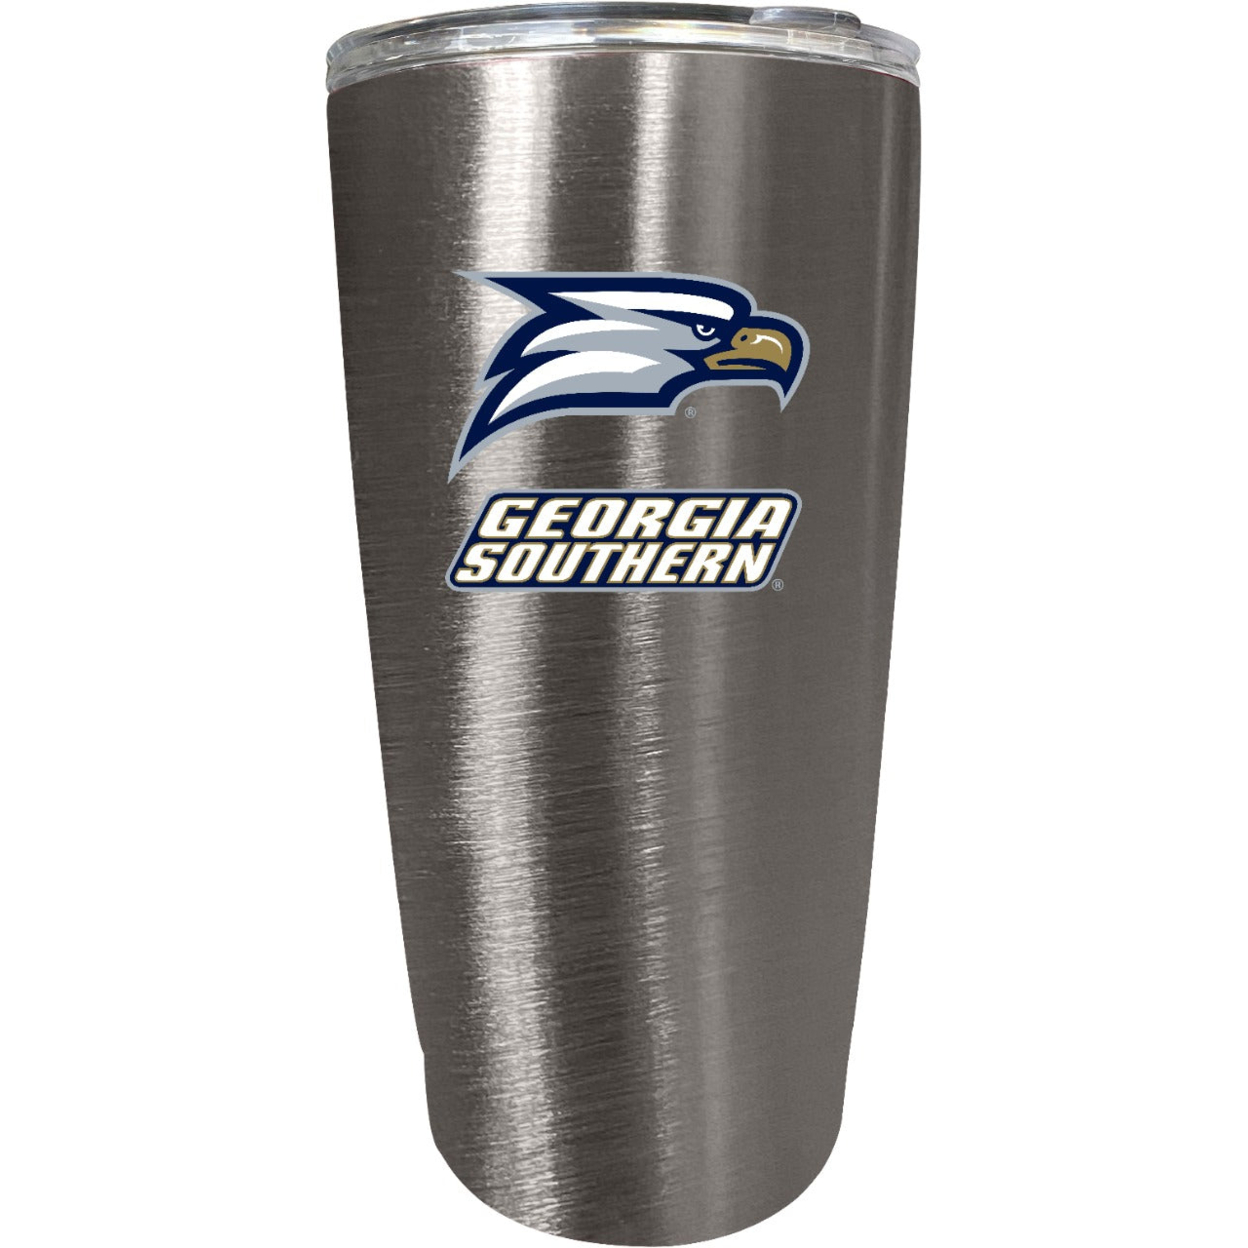 Georgia Southern Eagles 16 Oz Insulated Stainless Steel Tumbler Colorless